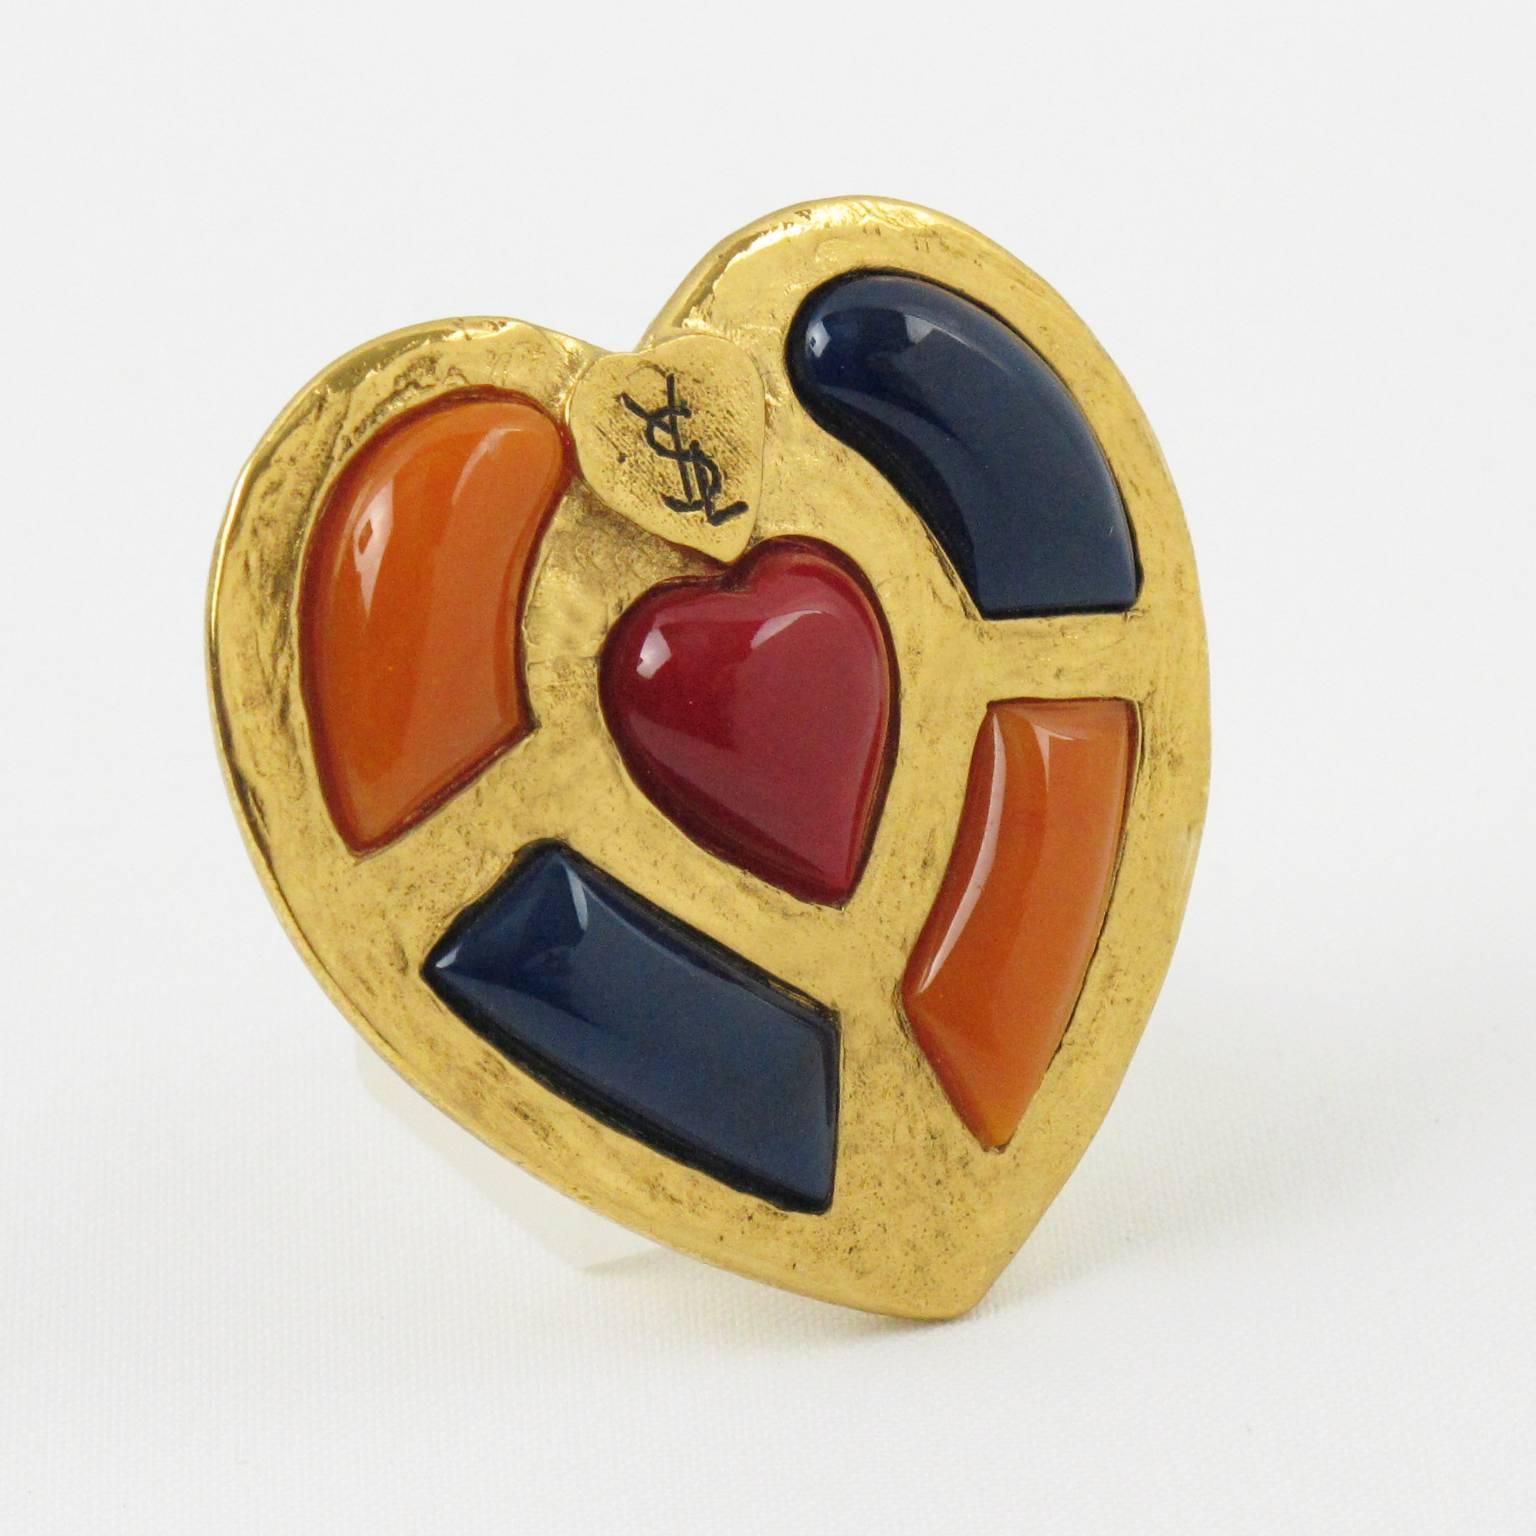 Elegant vintage YVES SAINT LAURENT YSL Paris couture Pin Brooch Pendant. Fabulous gilt metal massive heart shape, metal all textured with hand made feel, ornate with large domed resin cabochons in assorted tones of blue, orange and red. Security